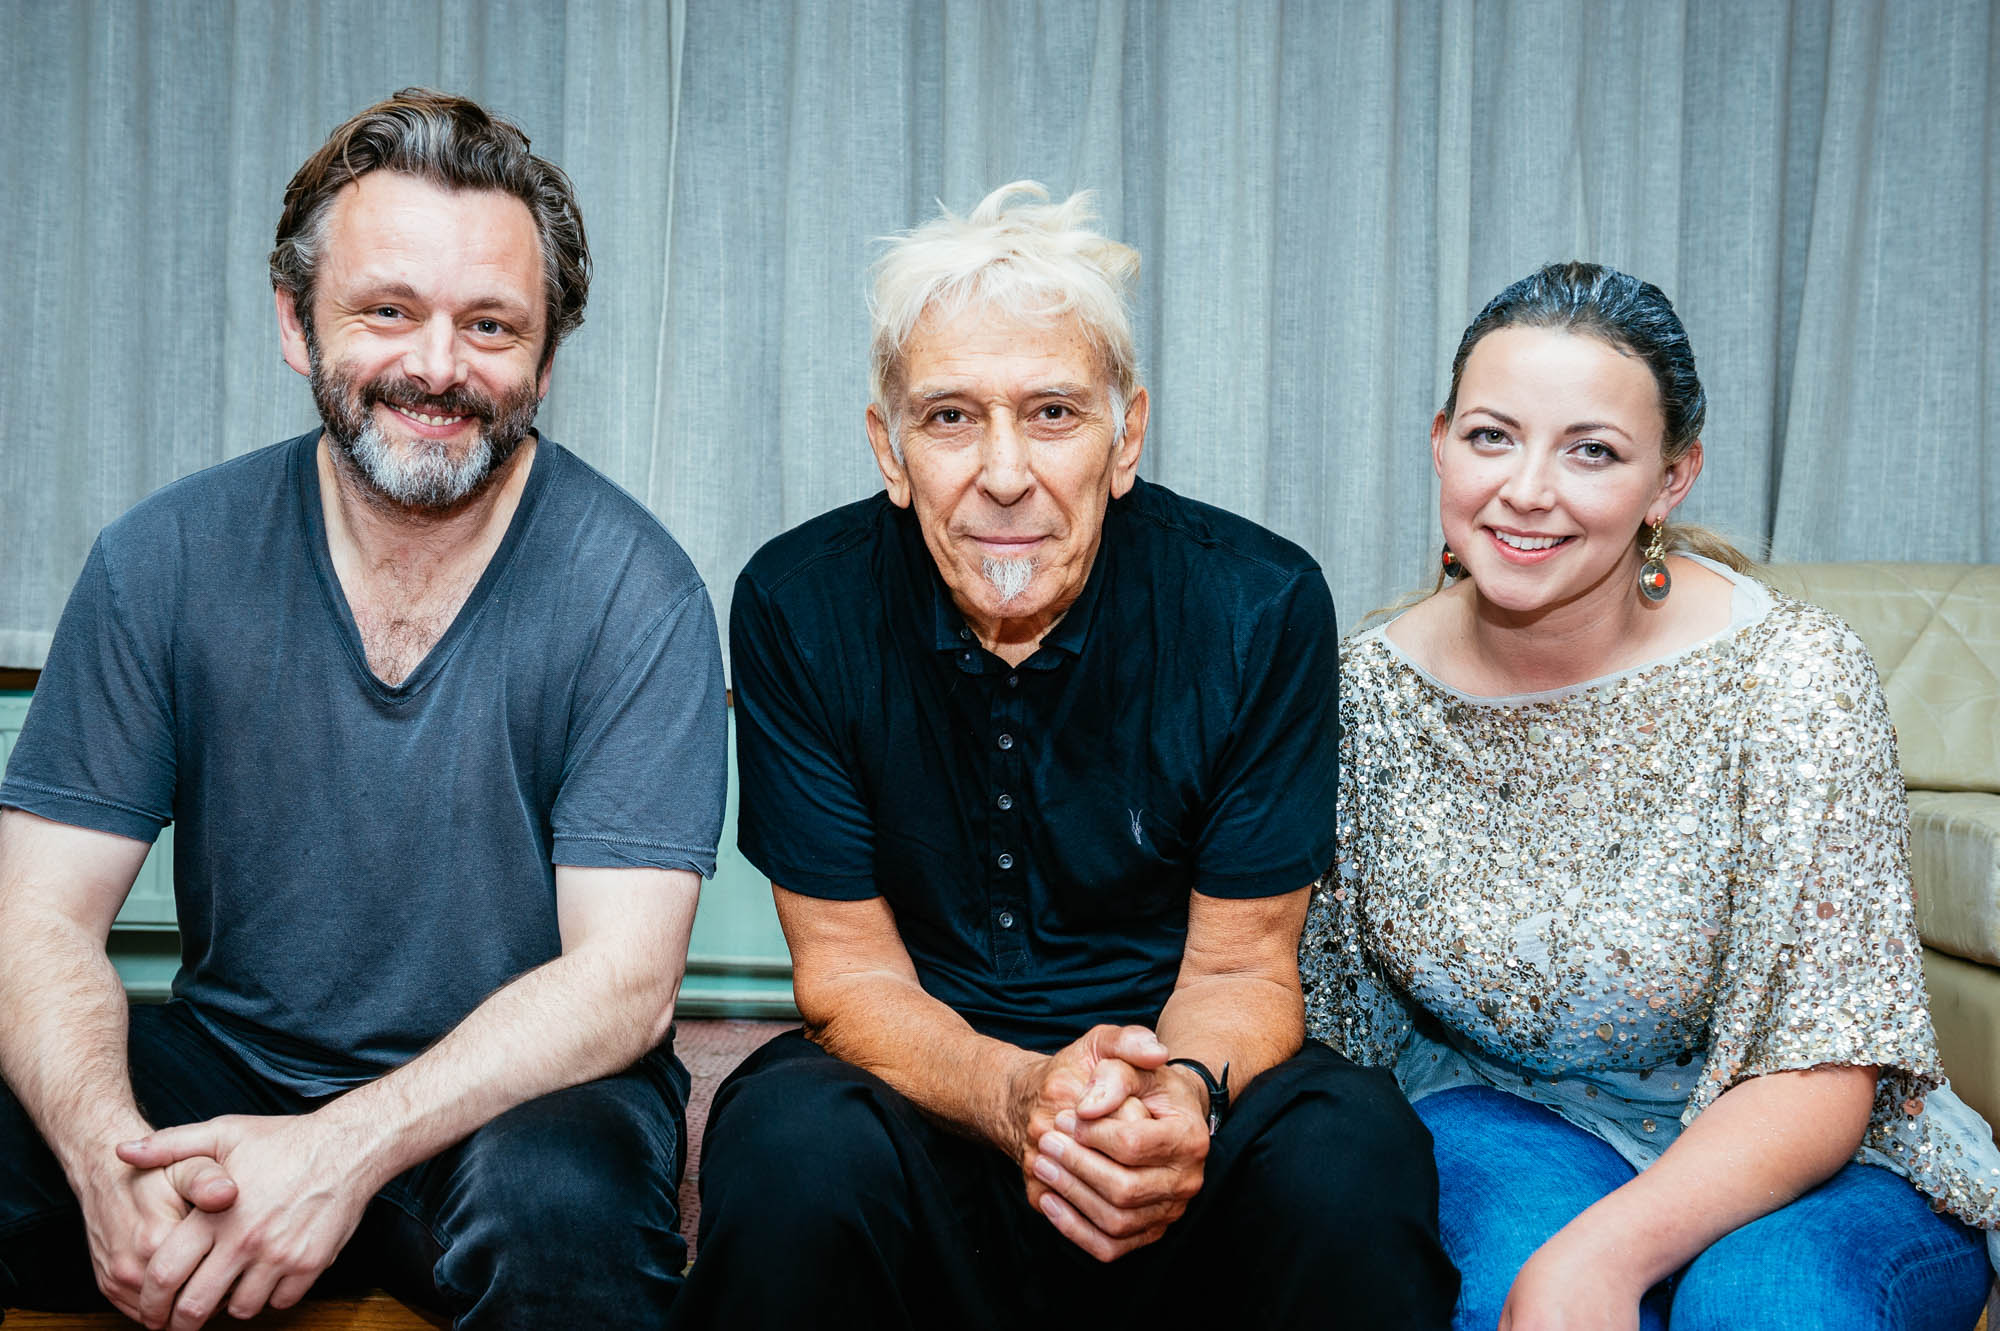 A photo of John Cale (centre) at Festival of Voice with Michael Sheen and Charlotte Church